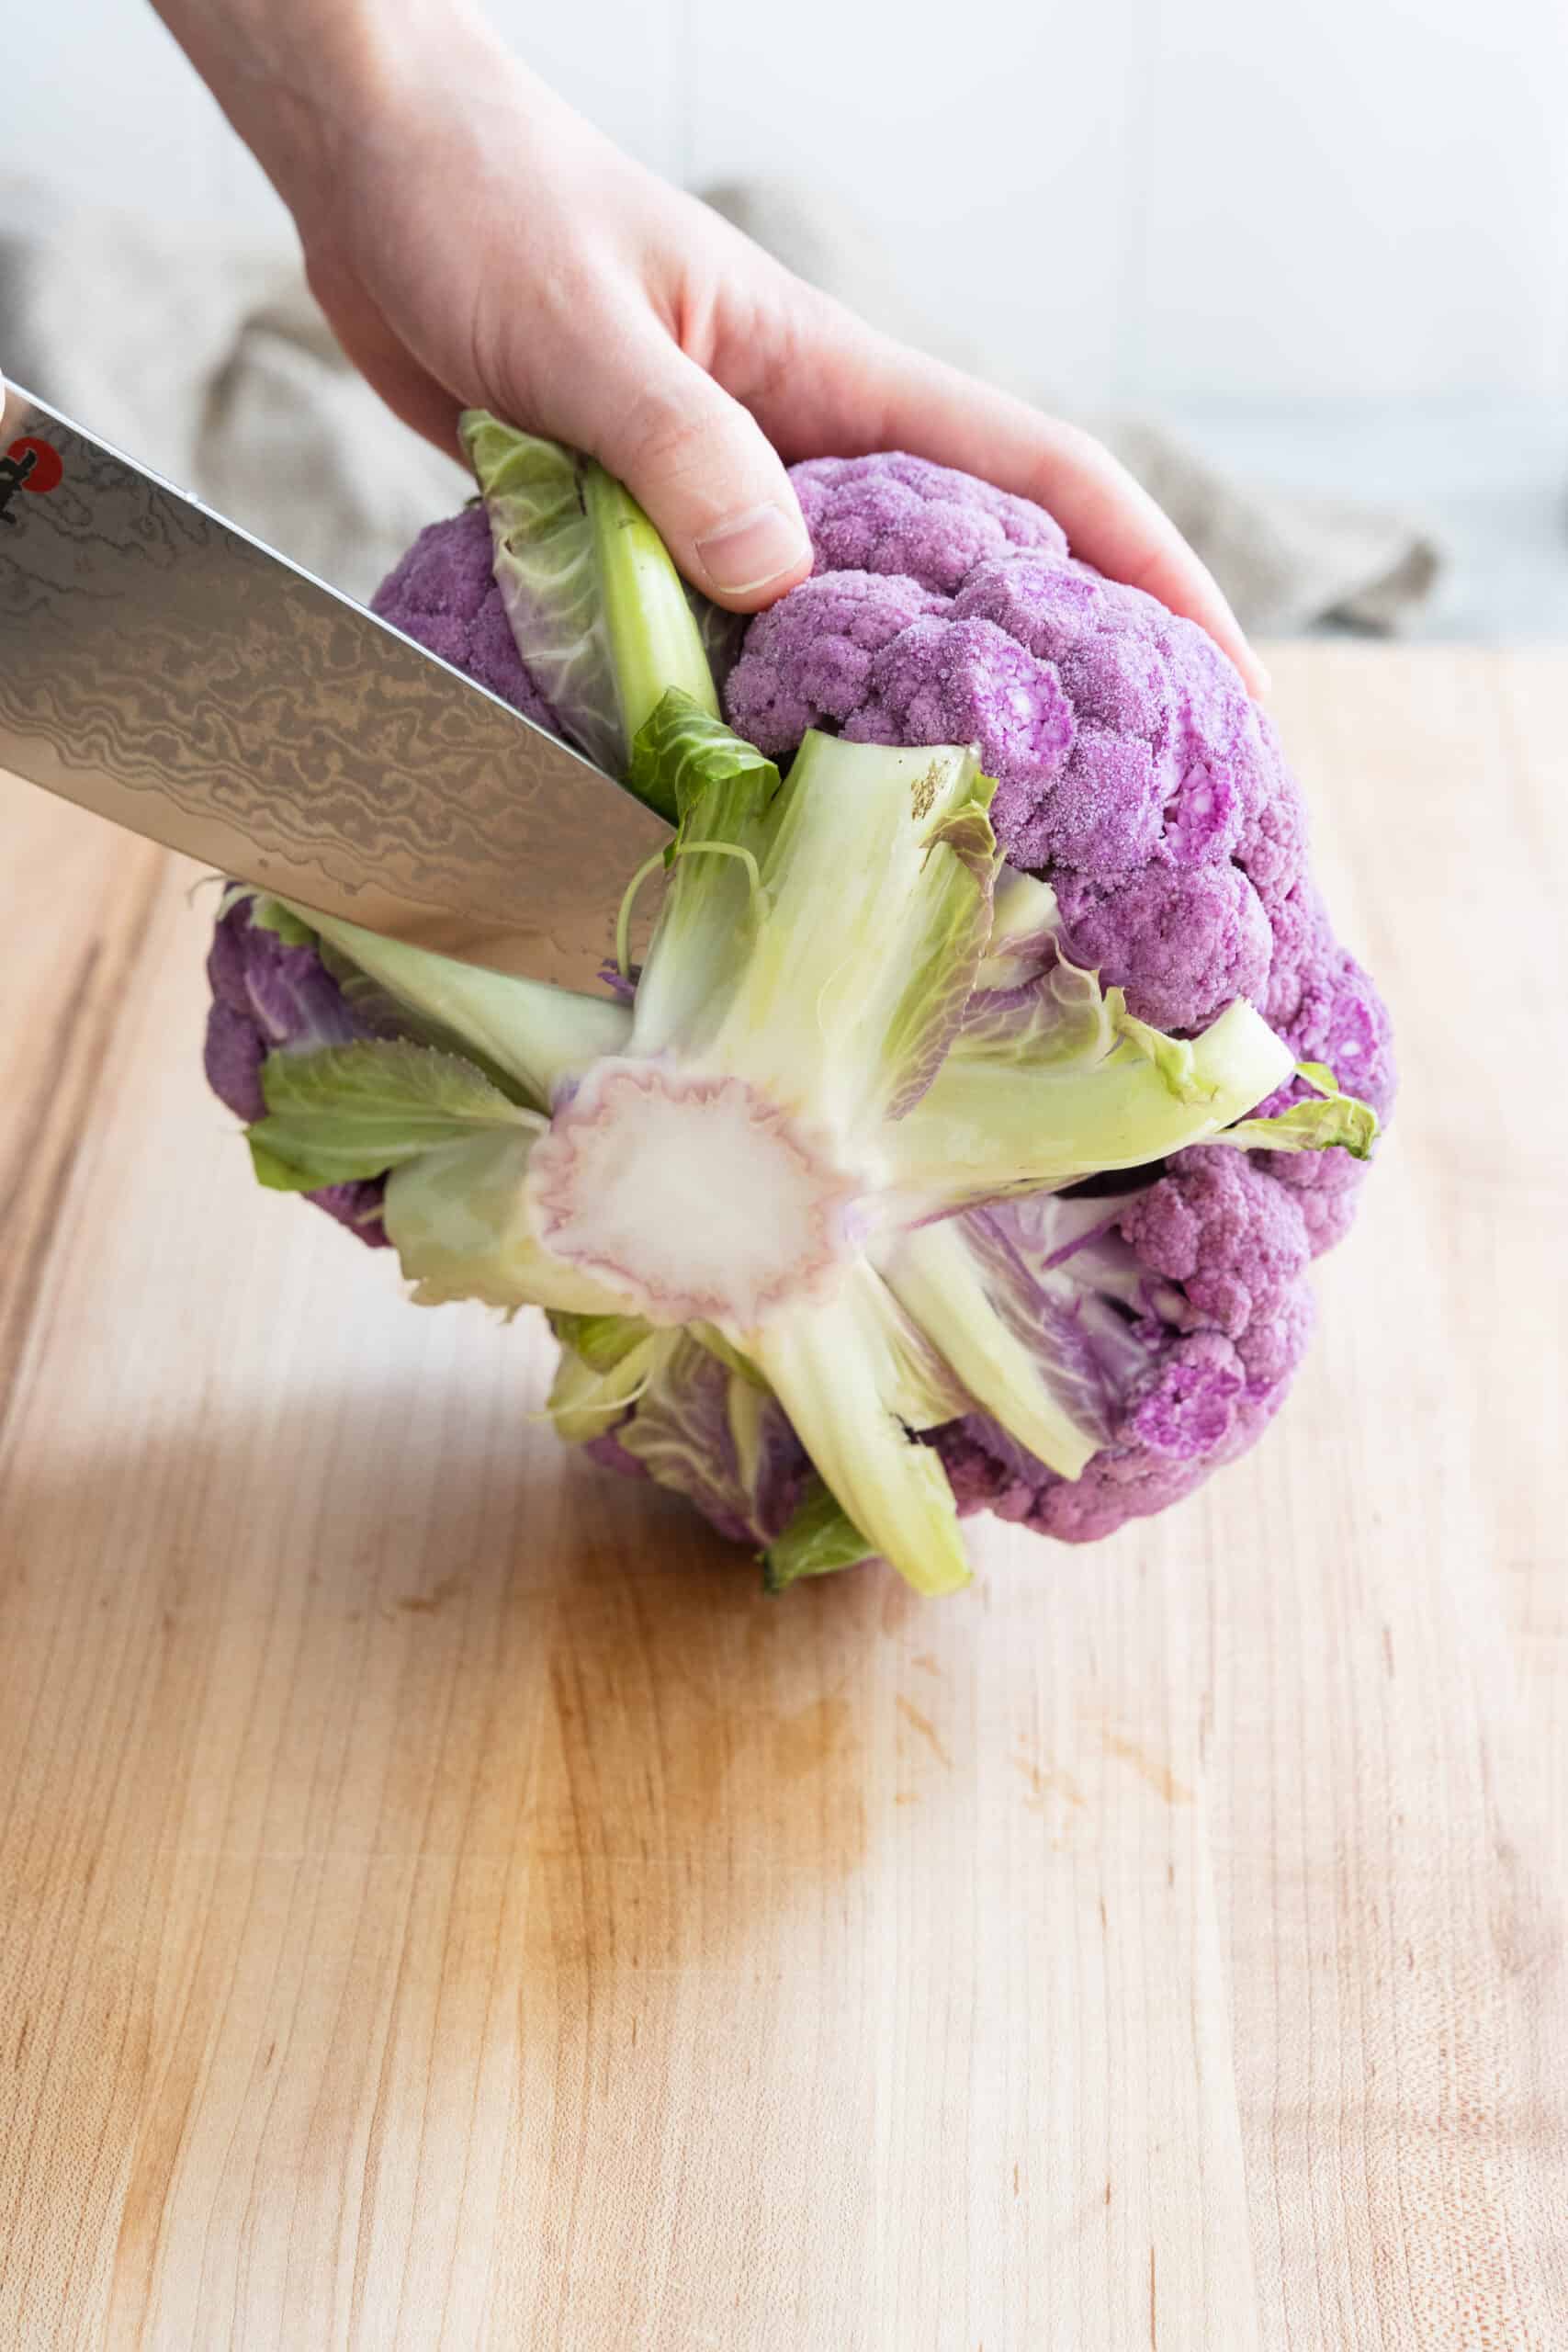 Removing the Stem from the Purple Cauliflower